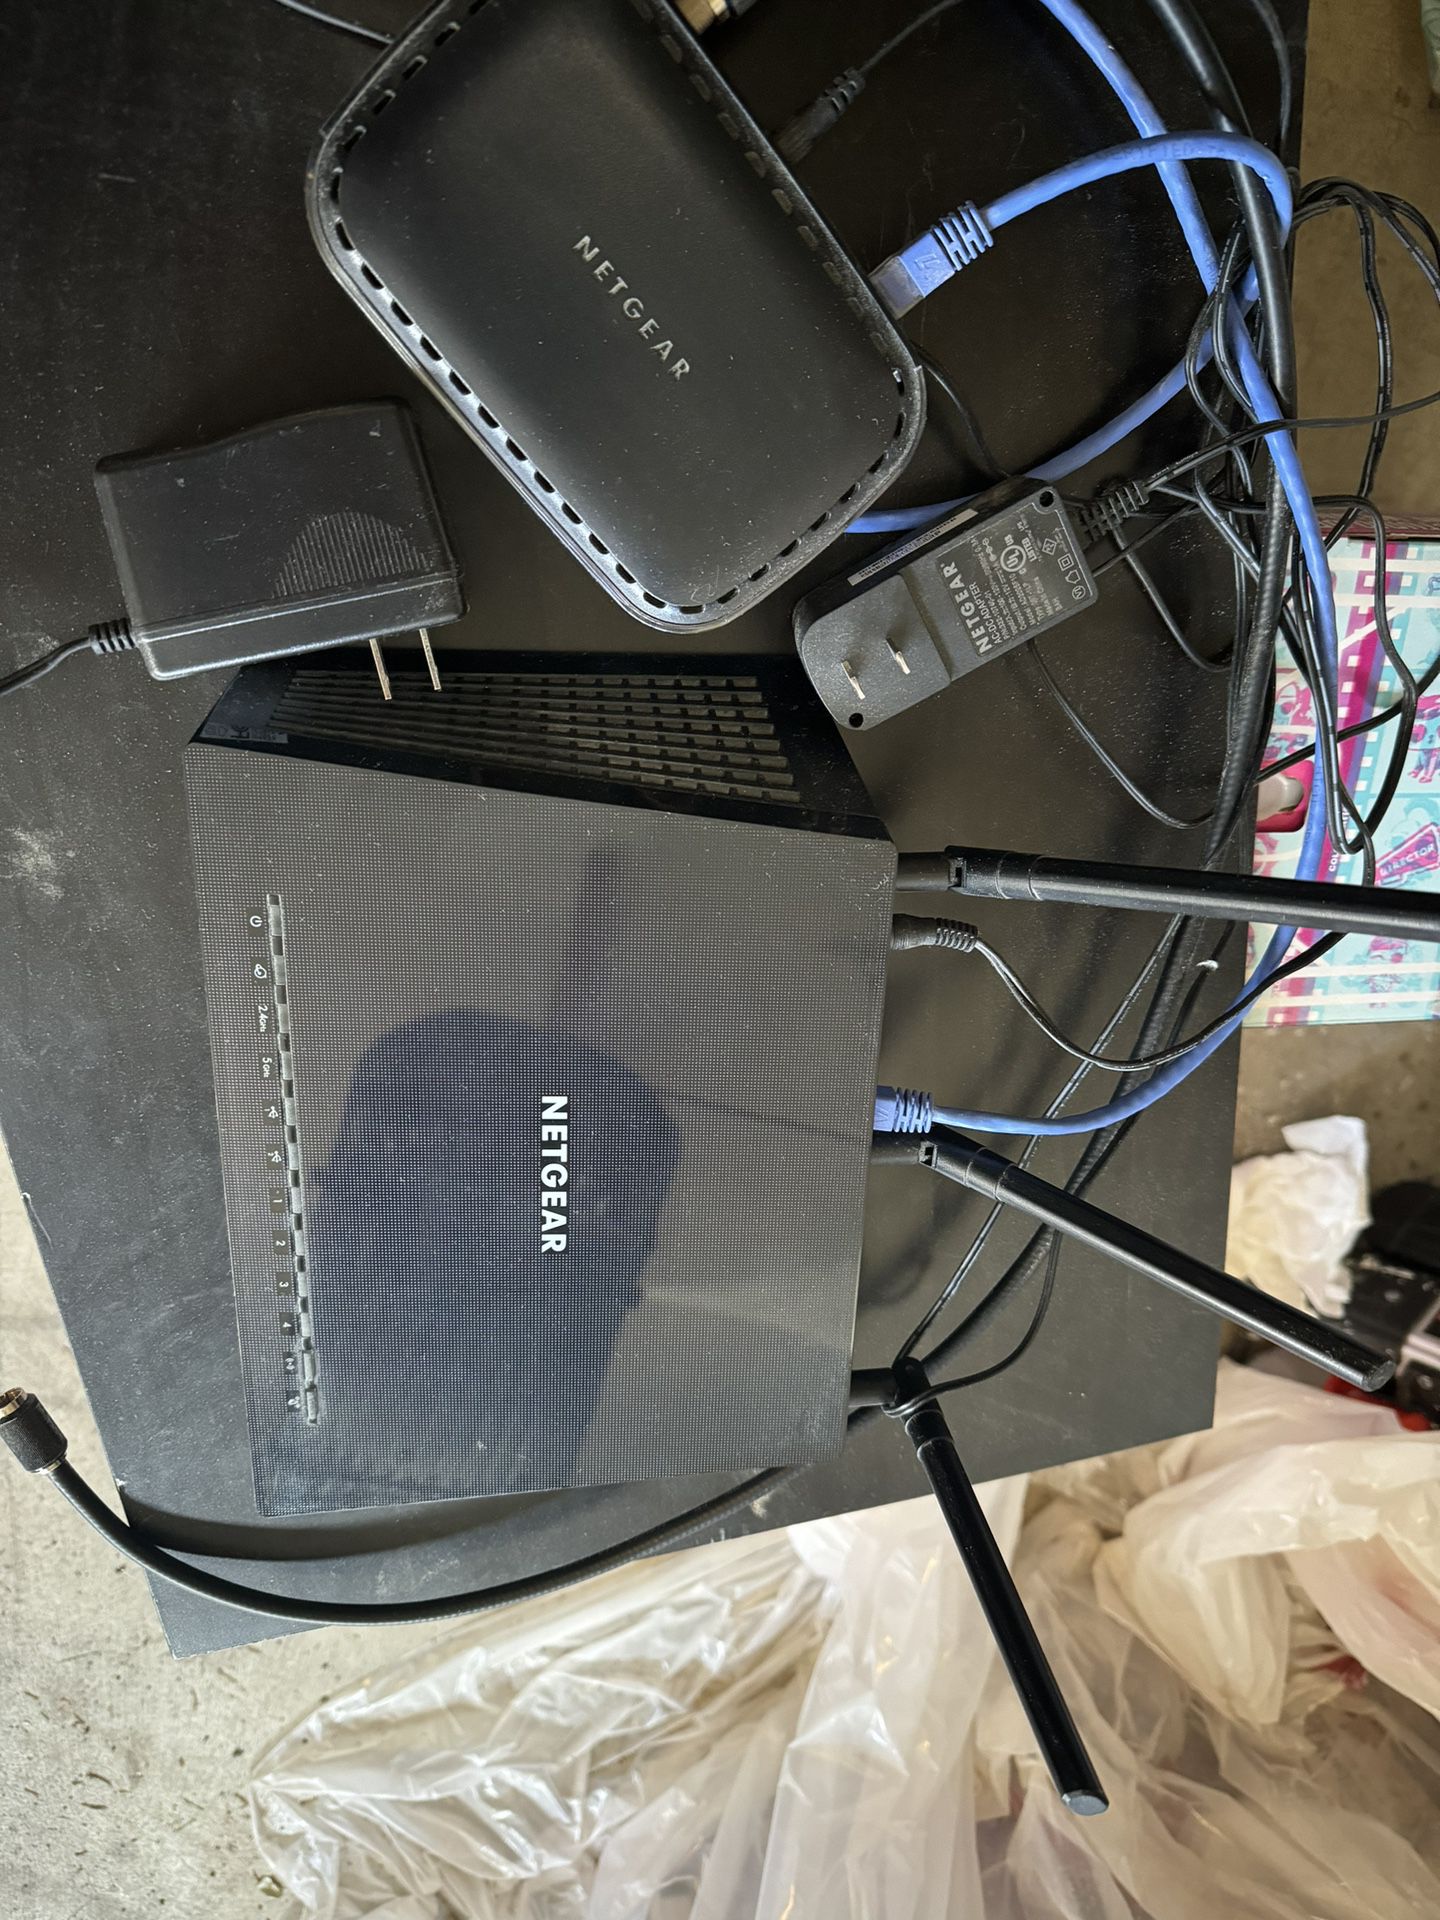 Netgear Modem And Wi-Wi Router